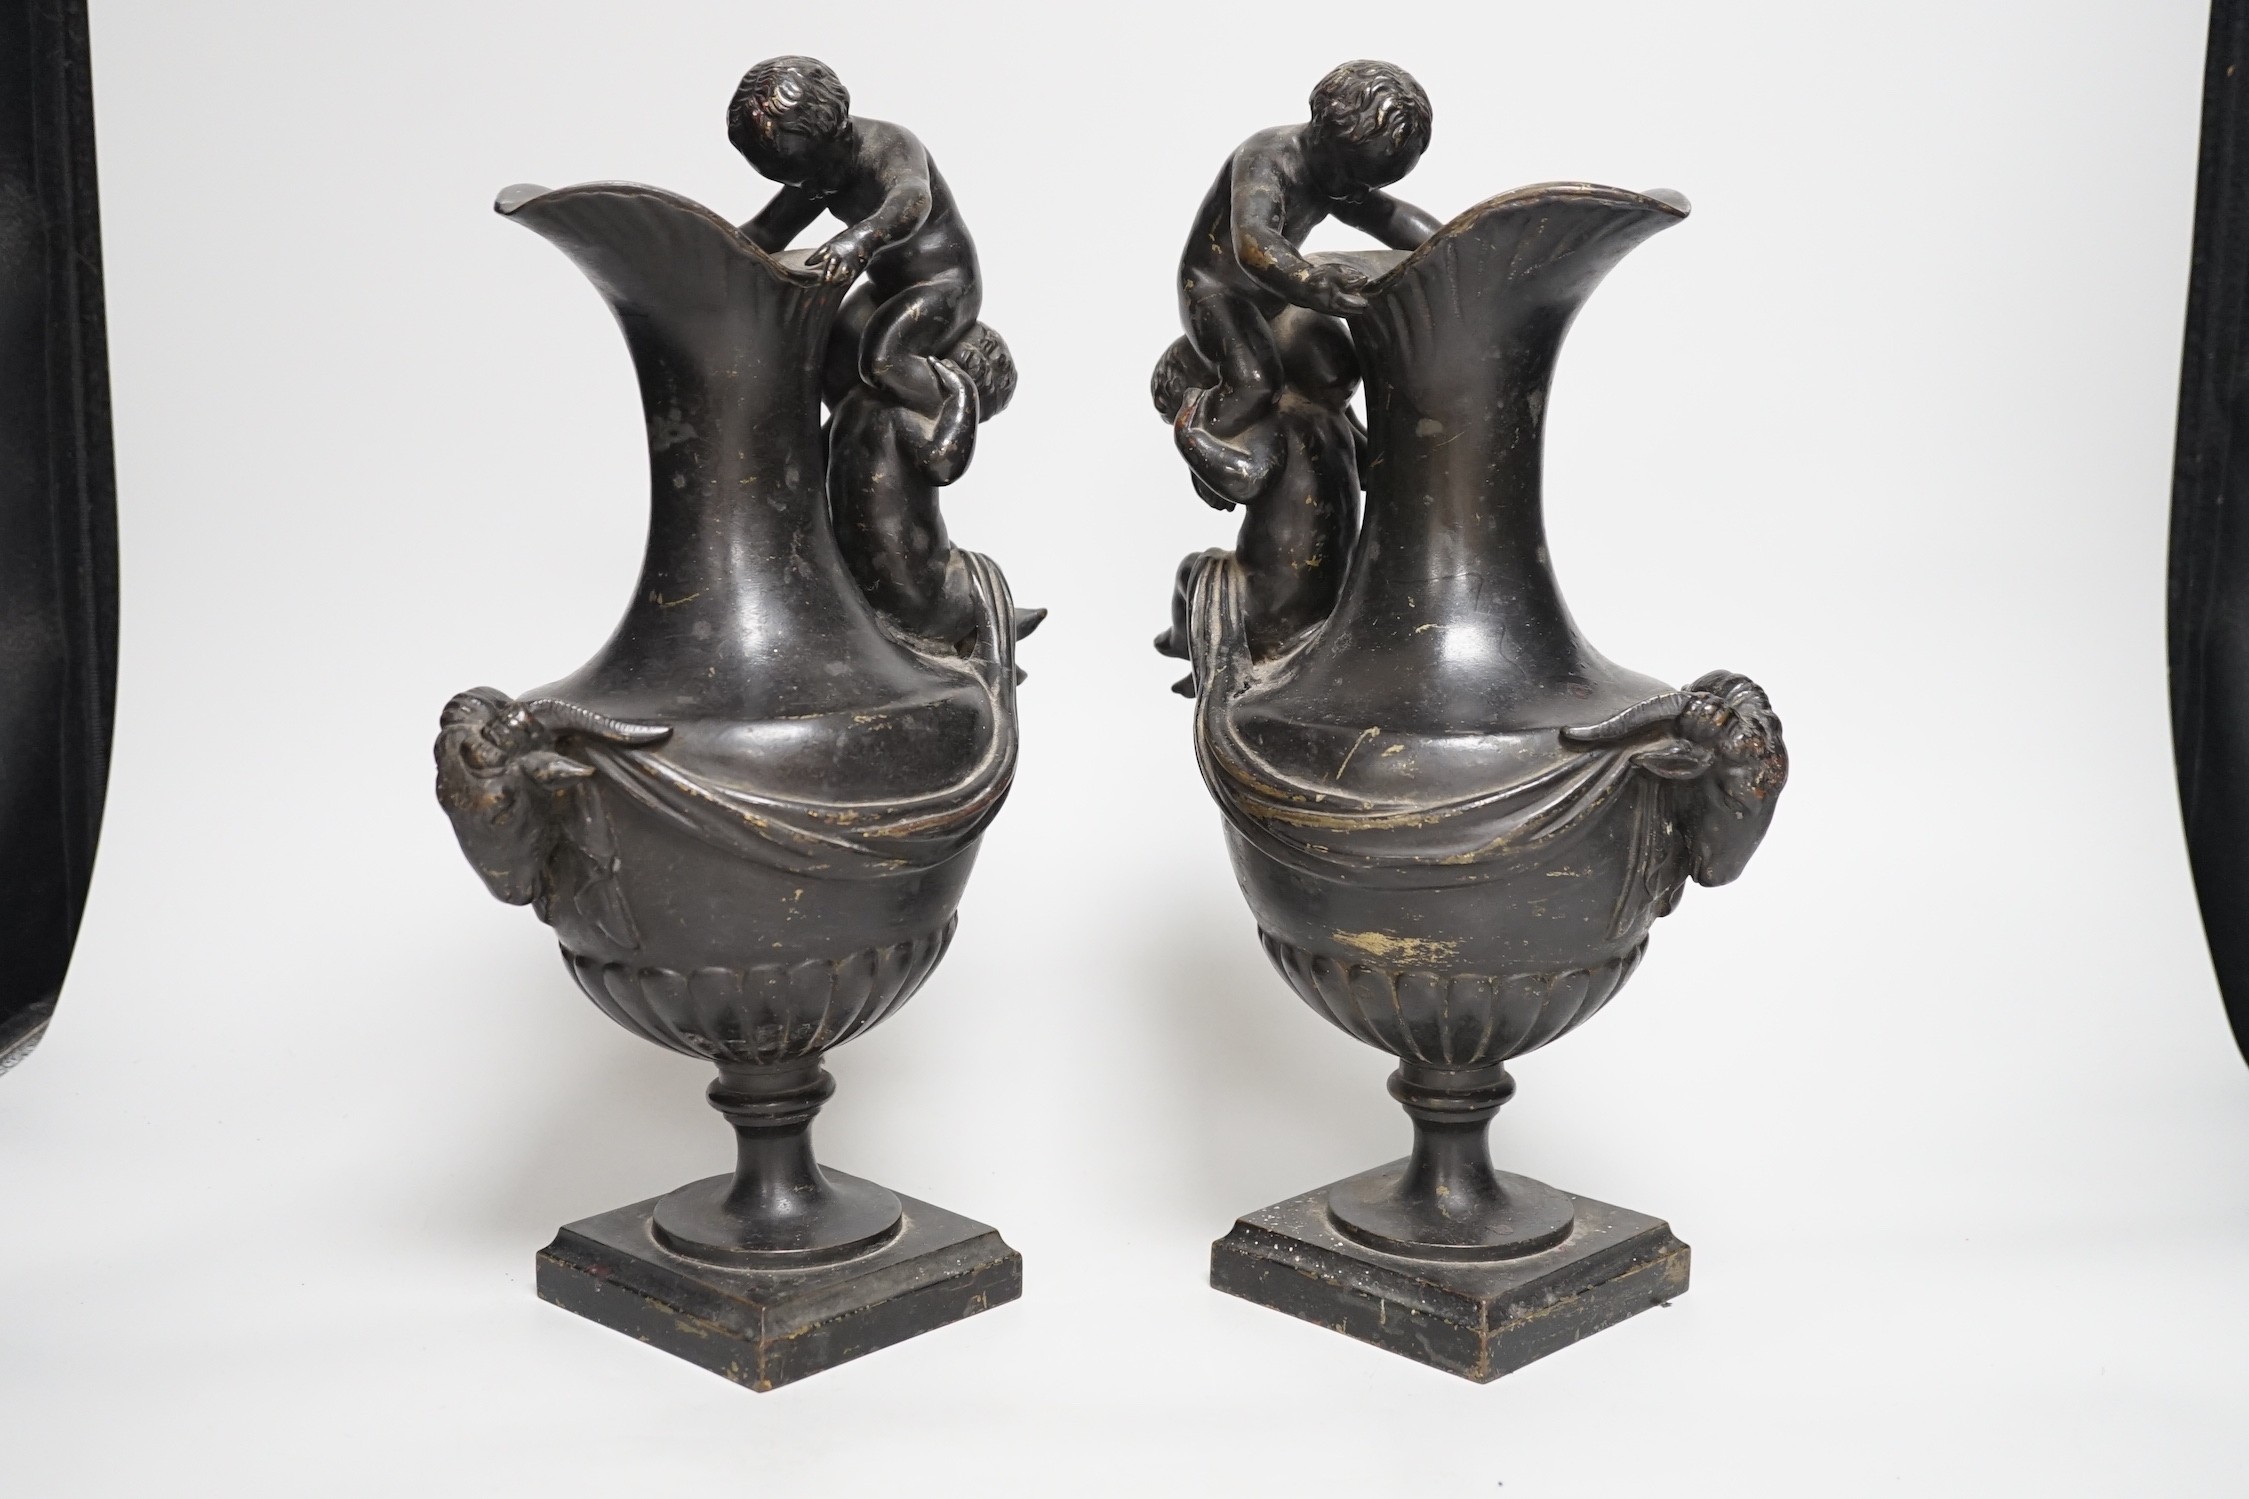 A pair of classical revival bronze urn side ornaments with cast rams head bodies. 32cm tall